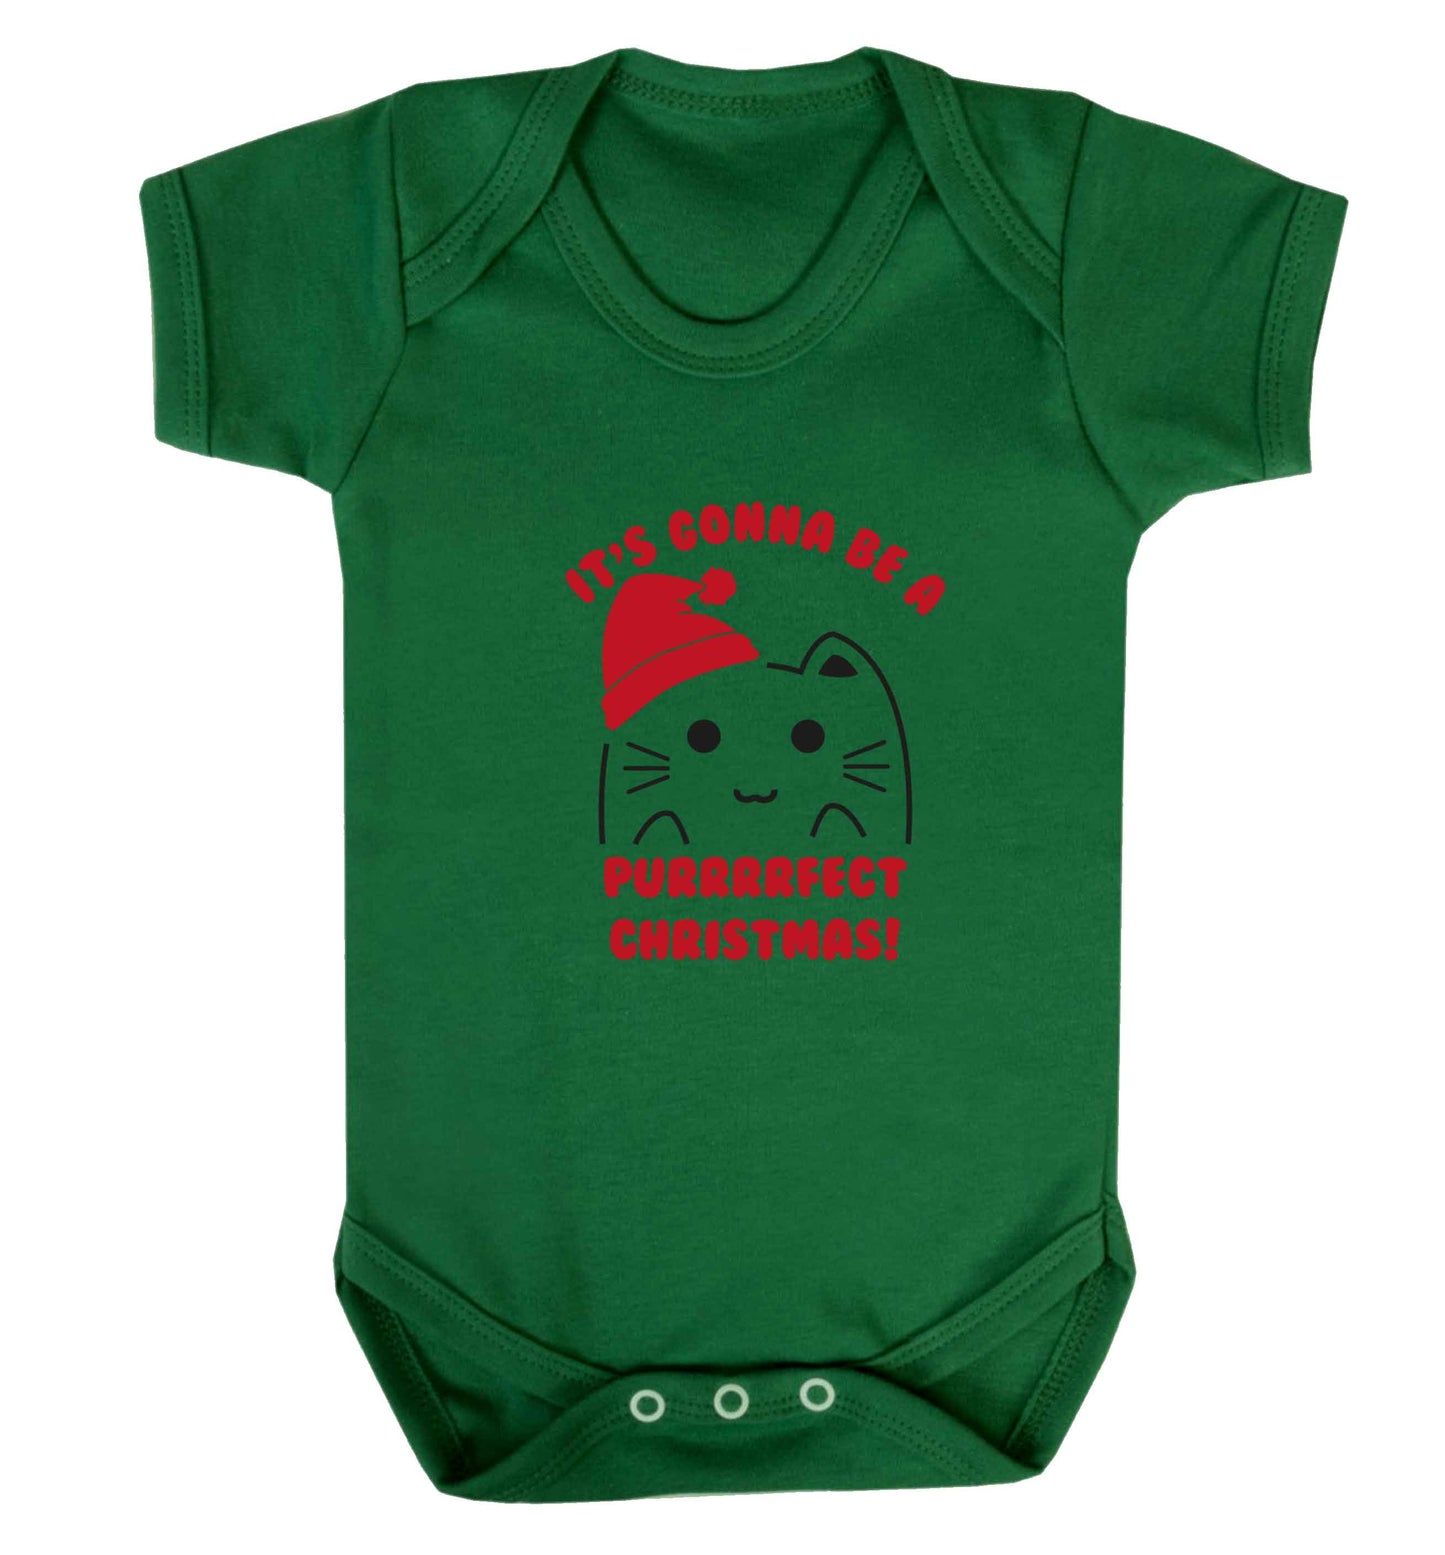 It's going to be a purrfect Christmas baby vest green 18-24 months